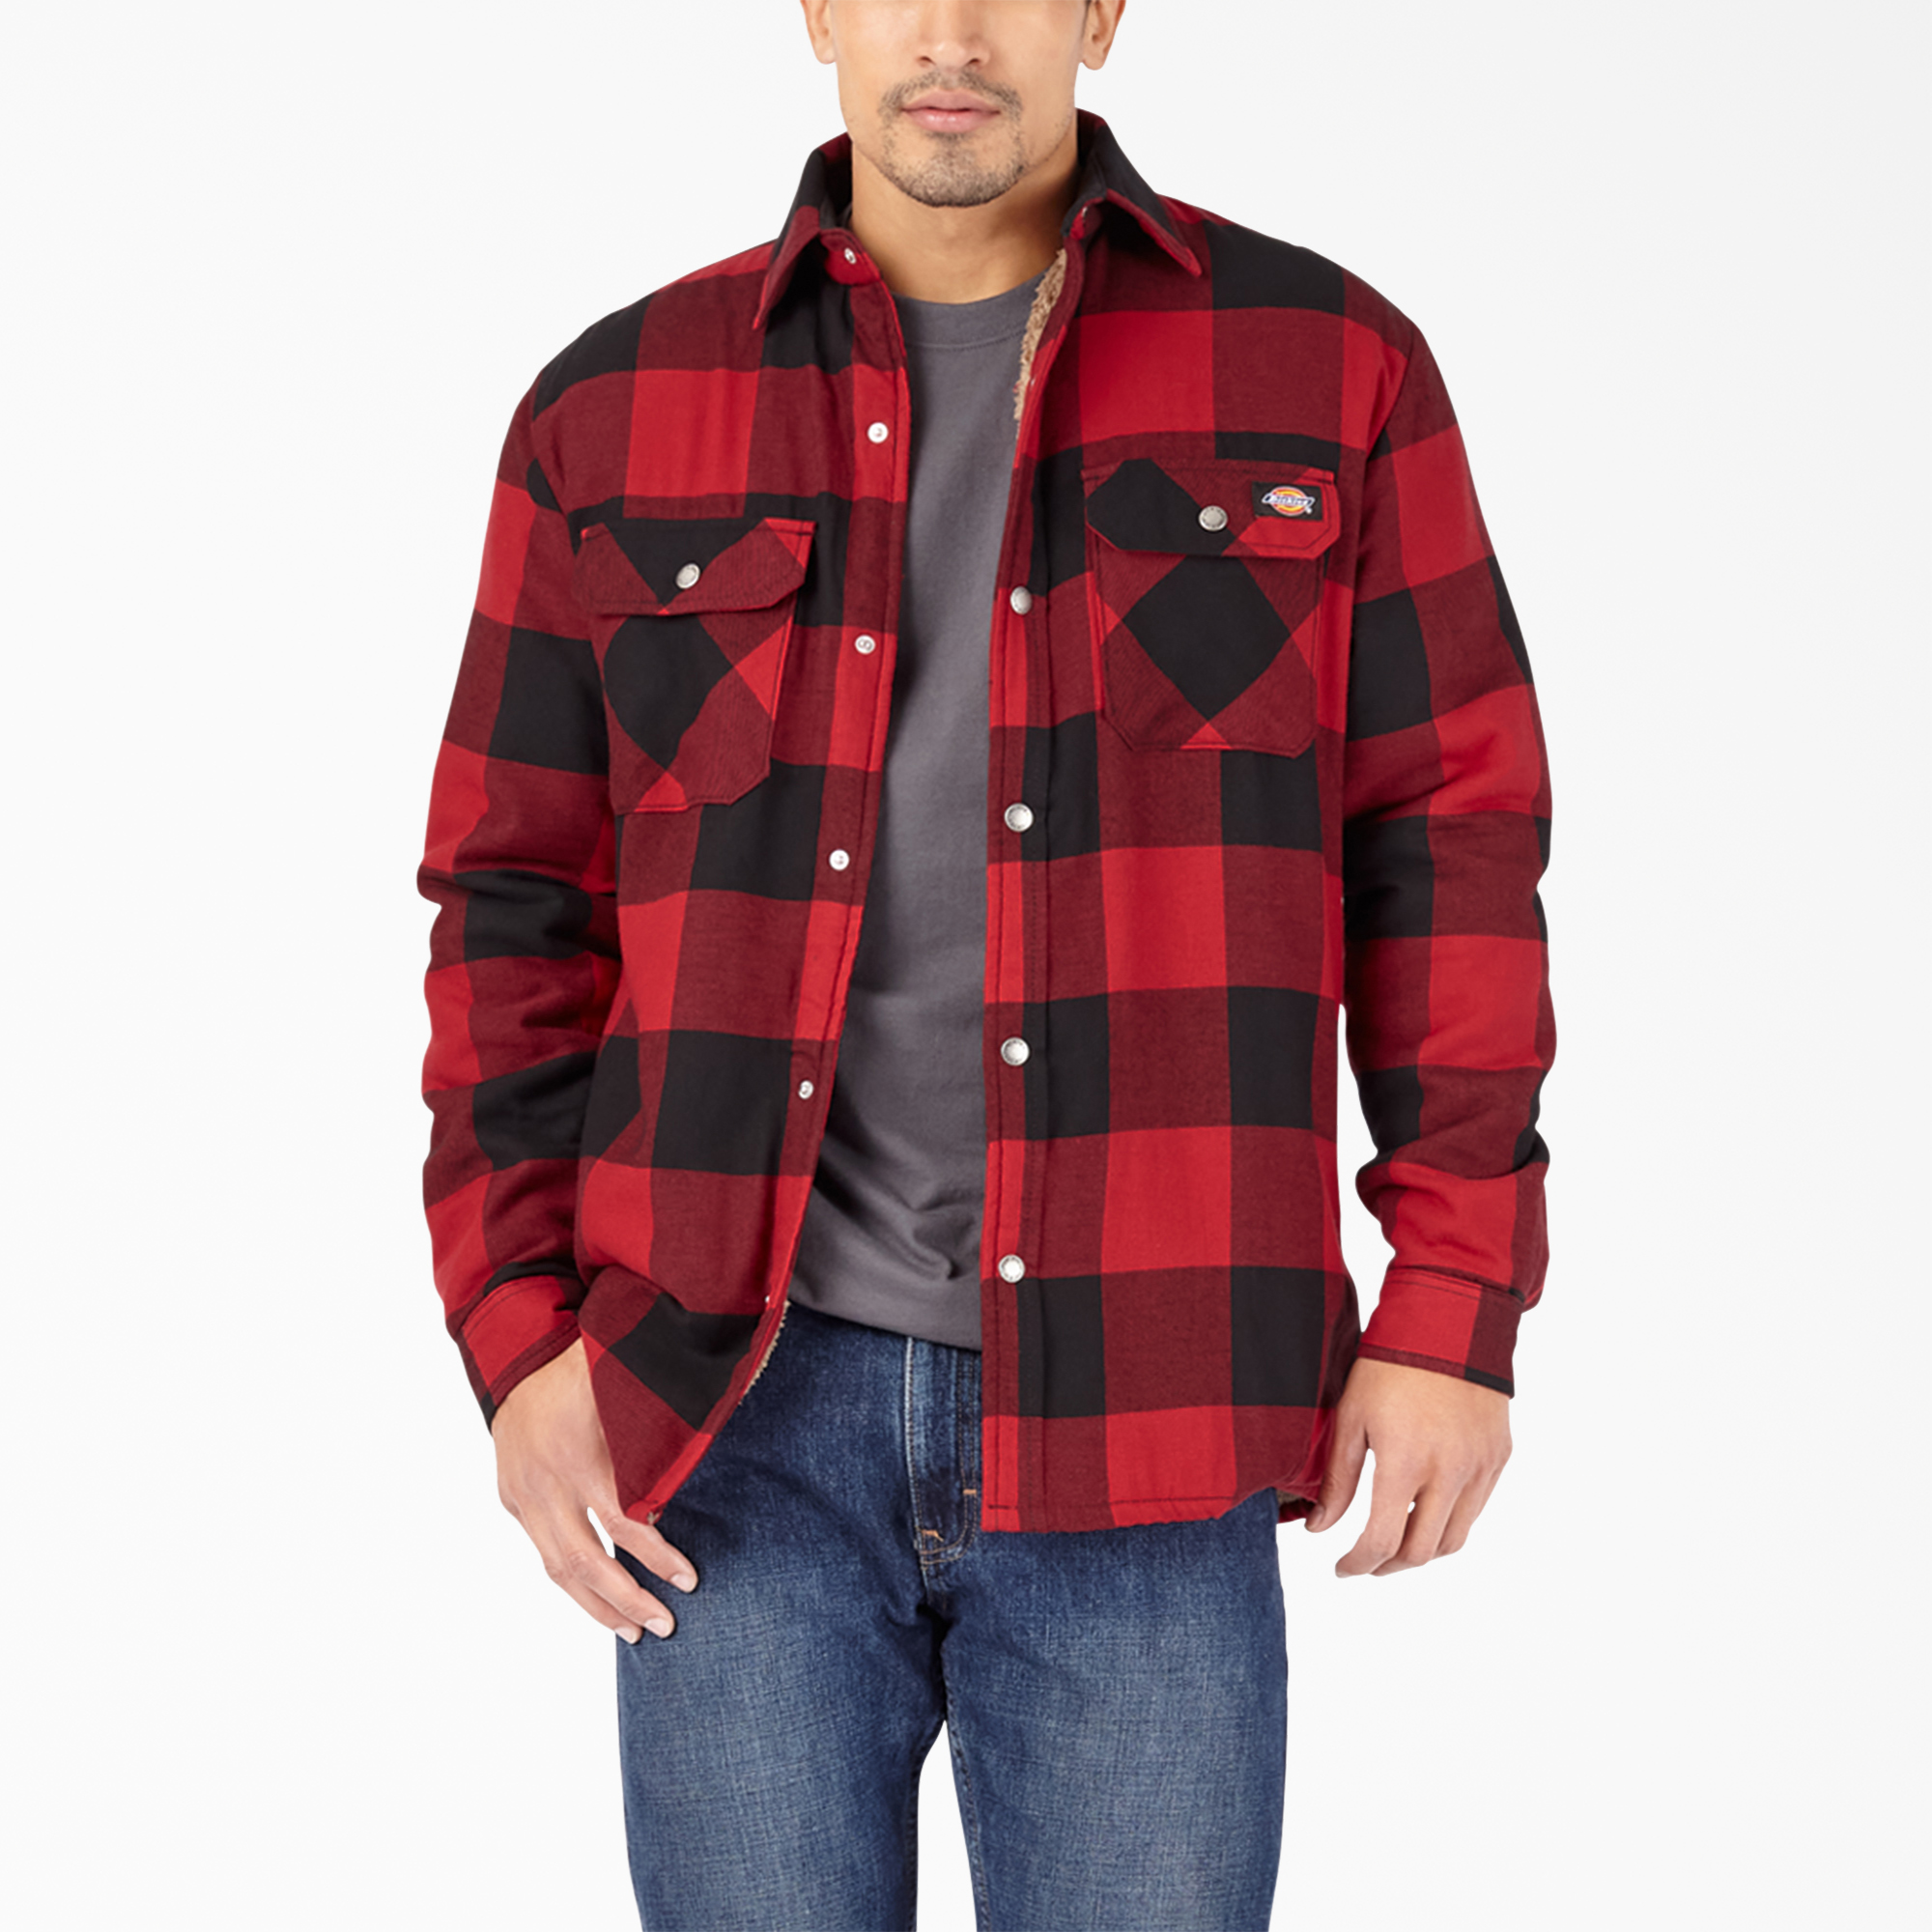 Flannel Shirt Jacket Mens Big And Tall - Shirt Photo Collection